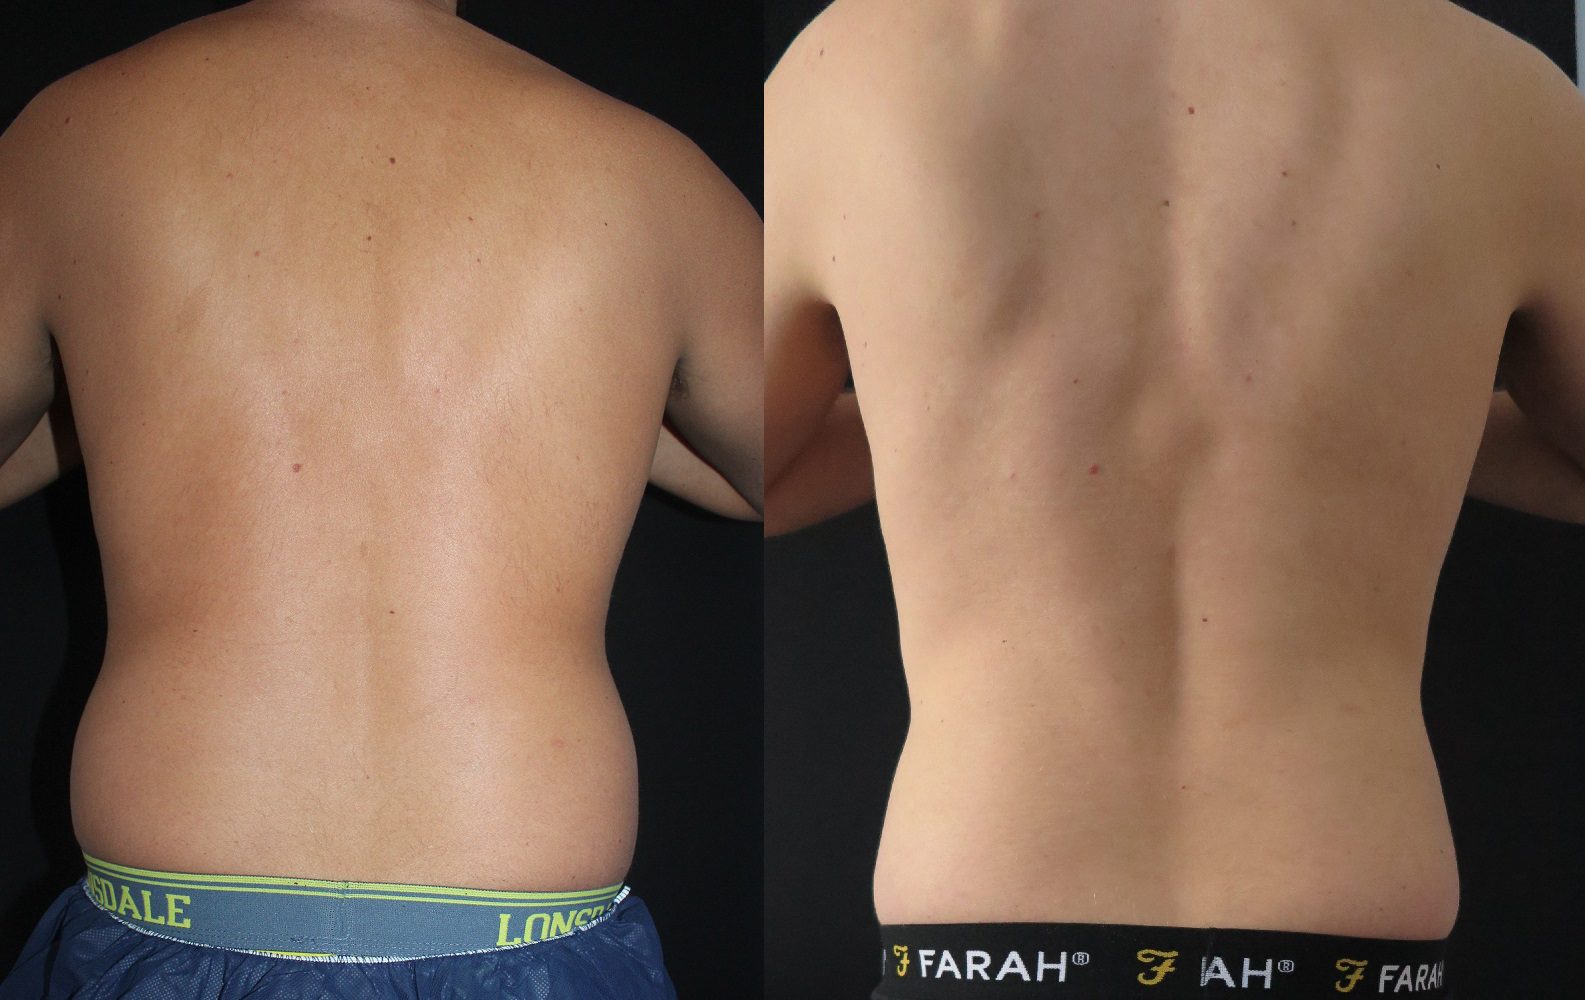 Coolsculpting back fat before and after results